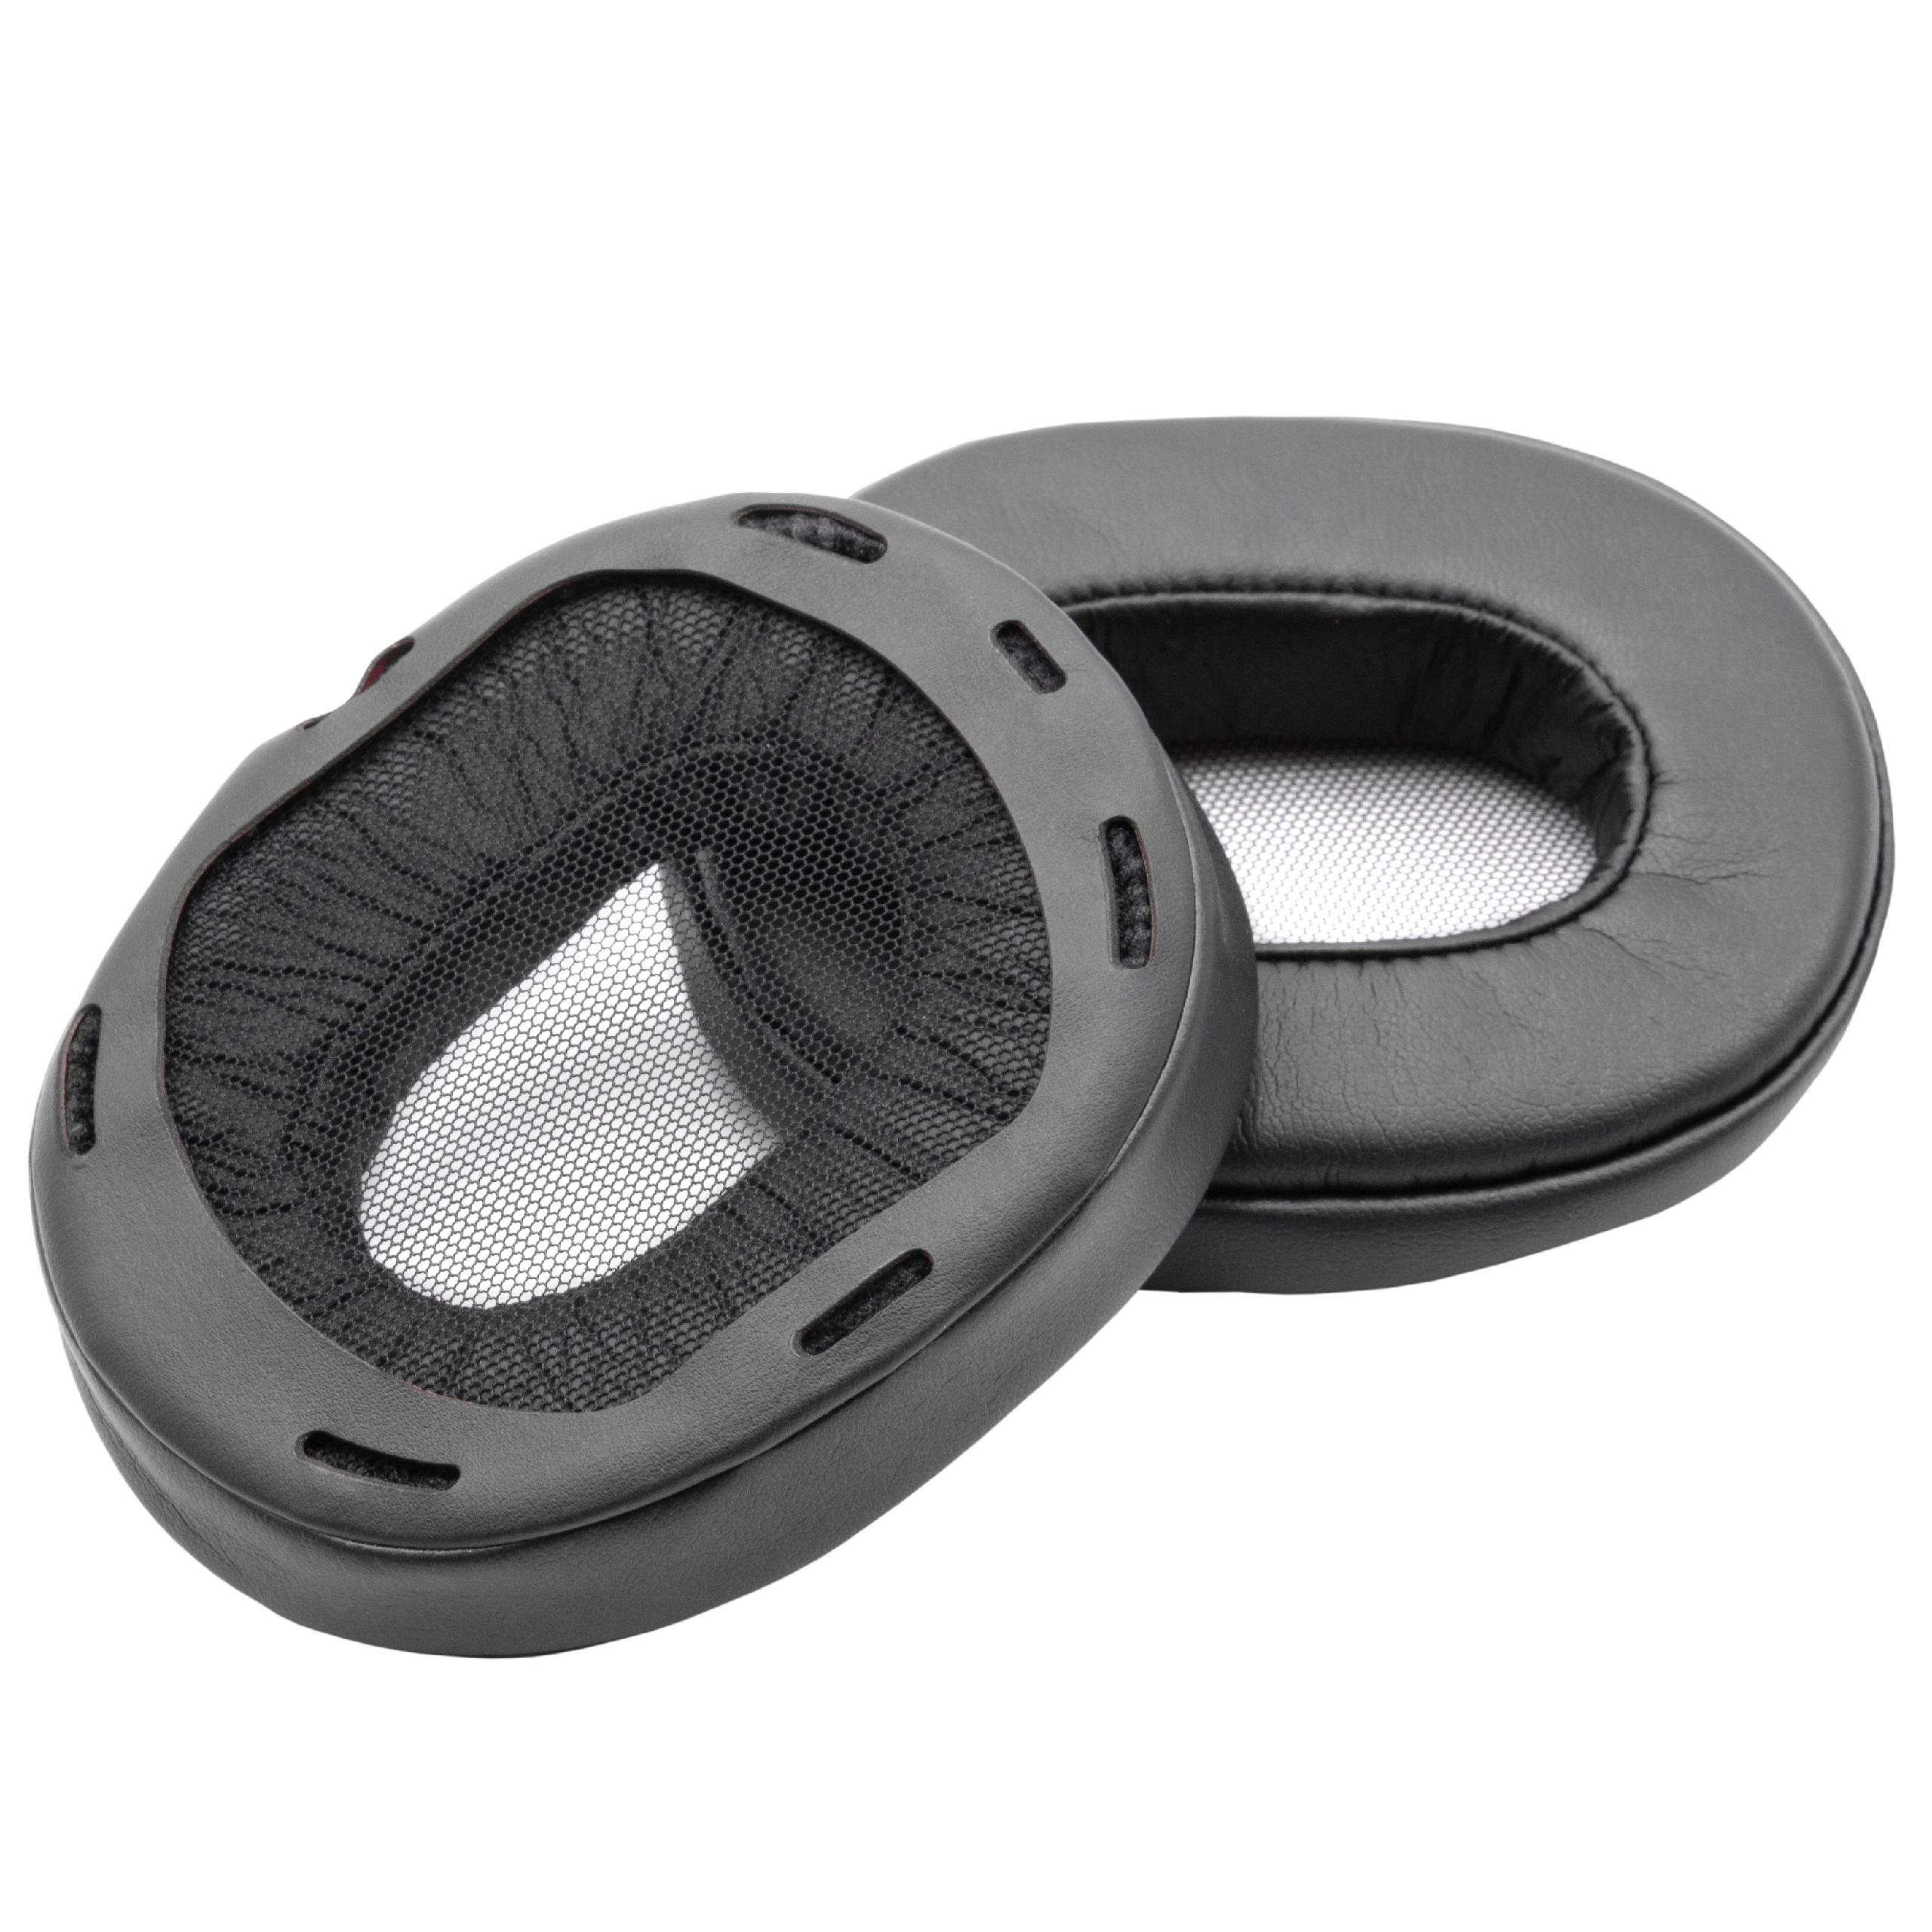 Ear Pads suitable for Sony MDR-1A Headphones etc. - polyurethane / foam, 20 mm thick